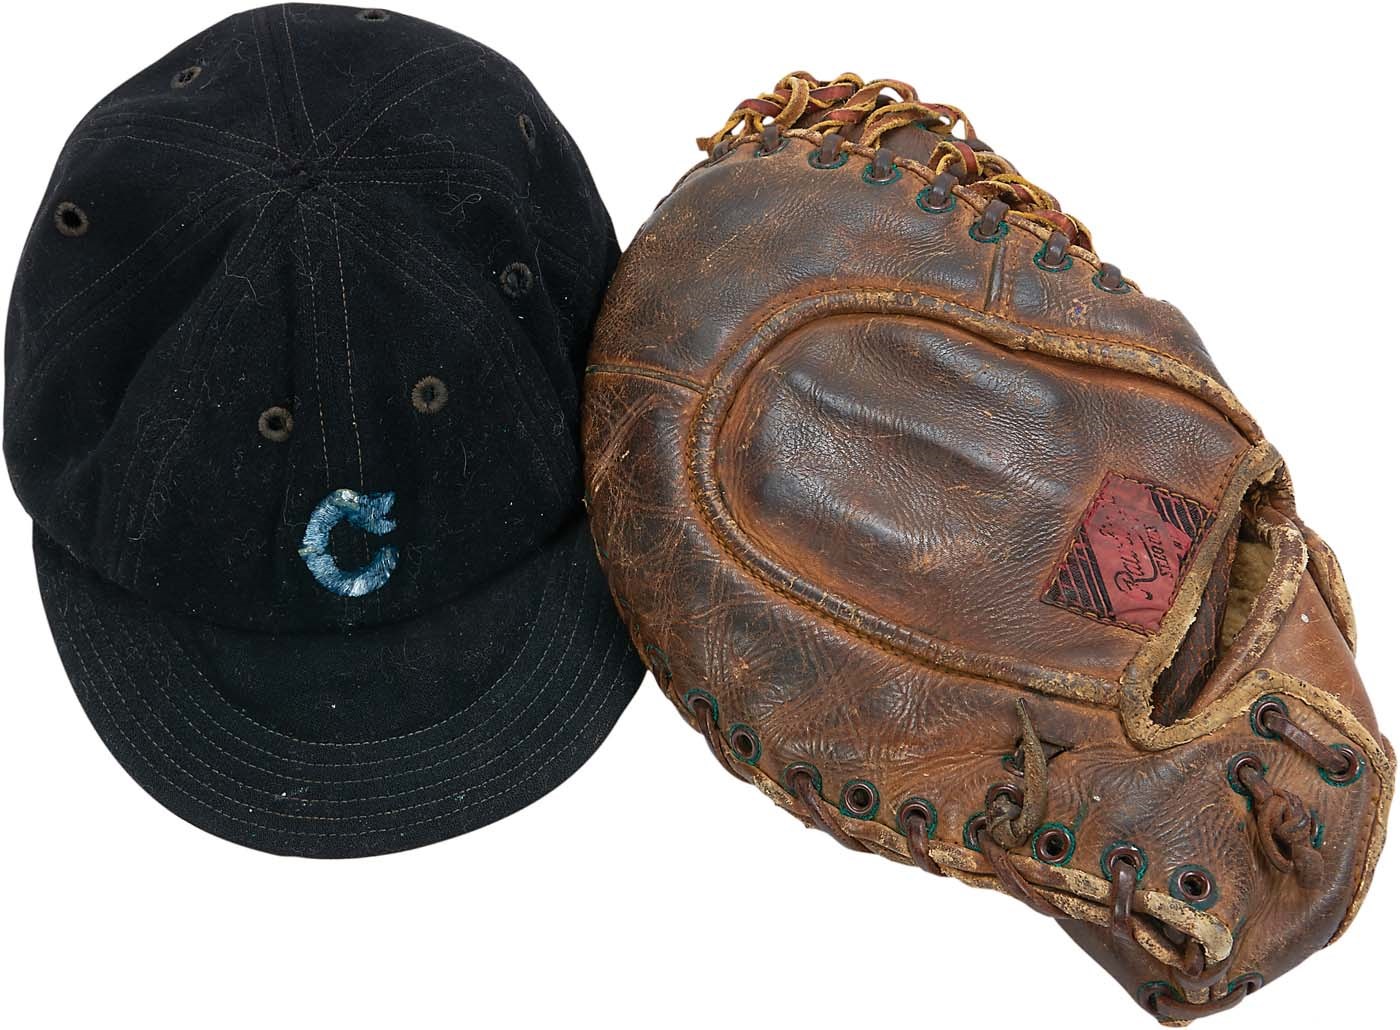 Cleveland Indians - 1930s Hal Trosky Cleveland Indians Game Used Hat and Glove